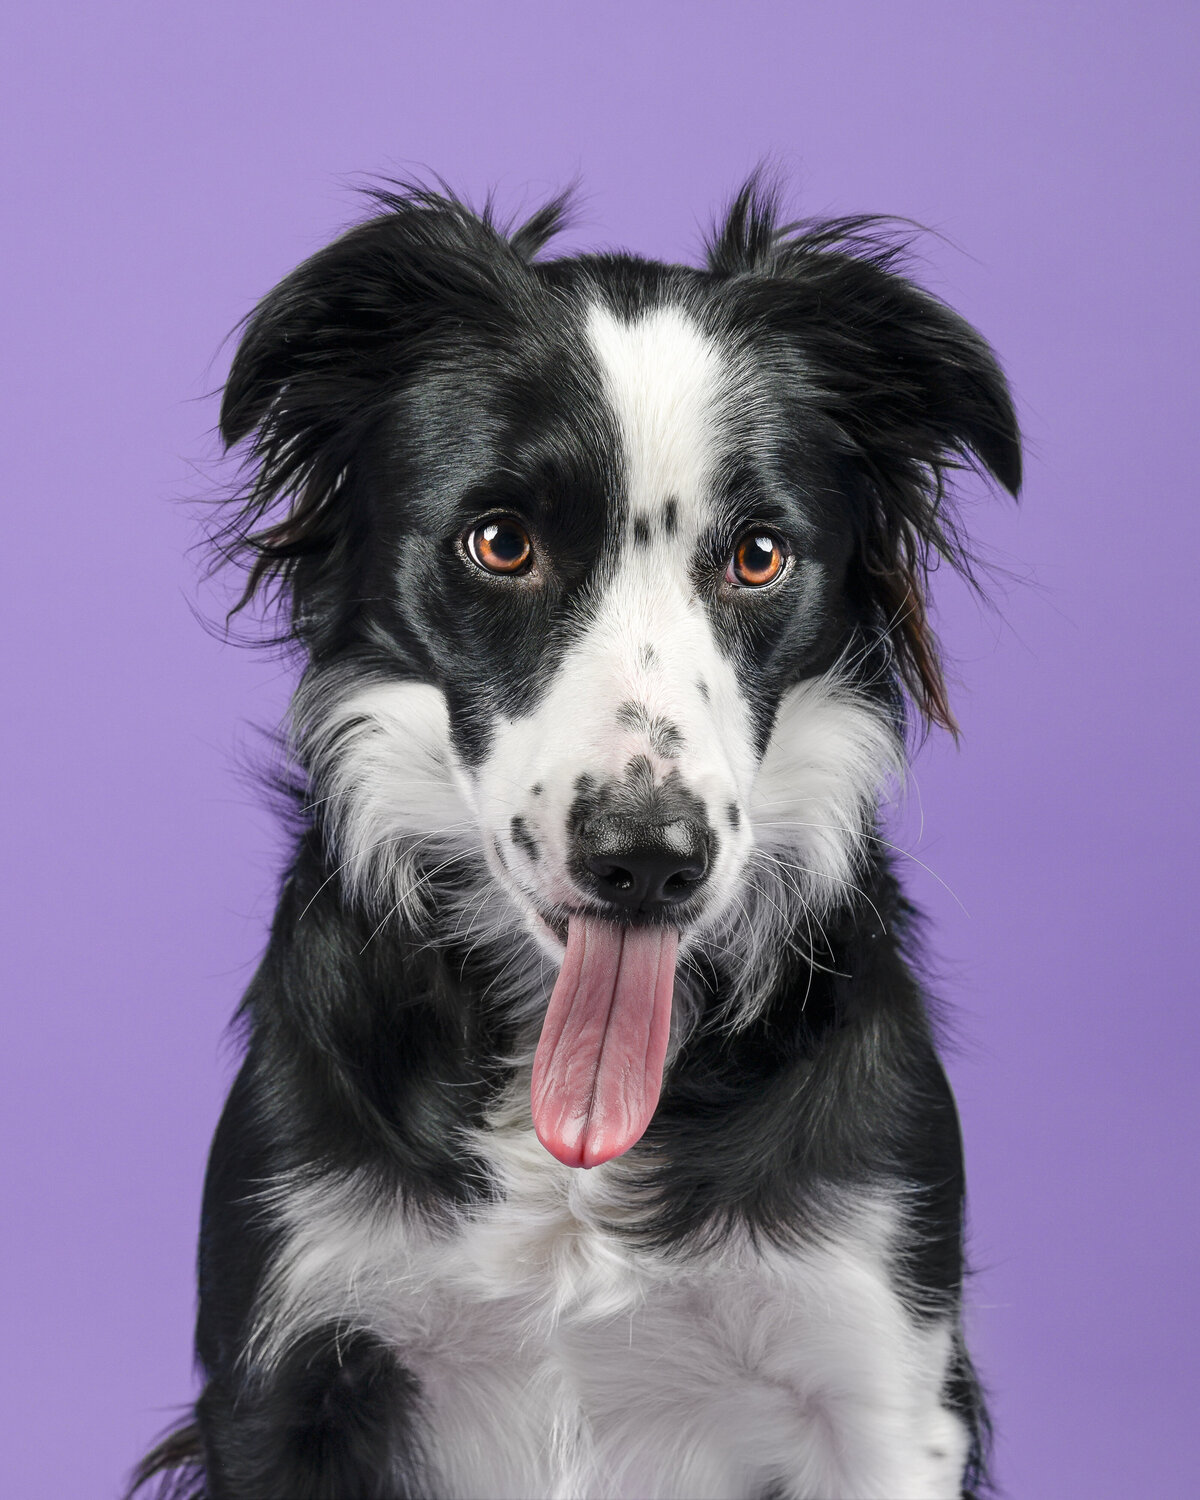 Enjoy the playful side of funny studio dog photography in Vancouver with Pets through the Lens Photography. This vibrant image features an energetic Border Collie with a delightful expression and tongue out, set against a lively purple backdrop. Our professional pet photography studio specializes in capturing the humorous and endearing moments of your pets, creating high-quality, memorable portraits. Trust Pets through the Lens Photography for an entertaining and unforgettable pet photography experience in Vancouver.